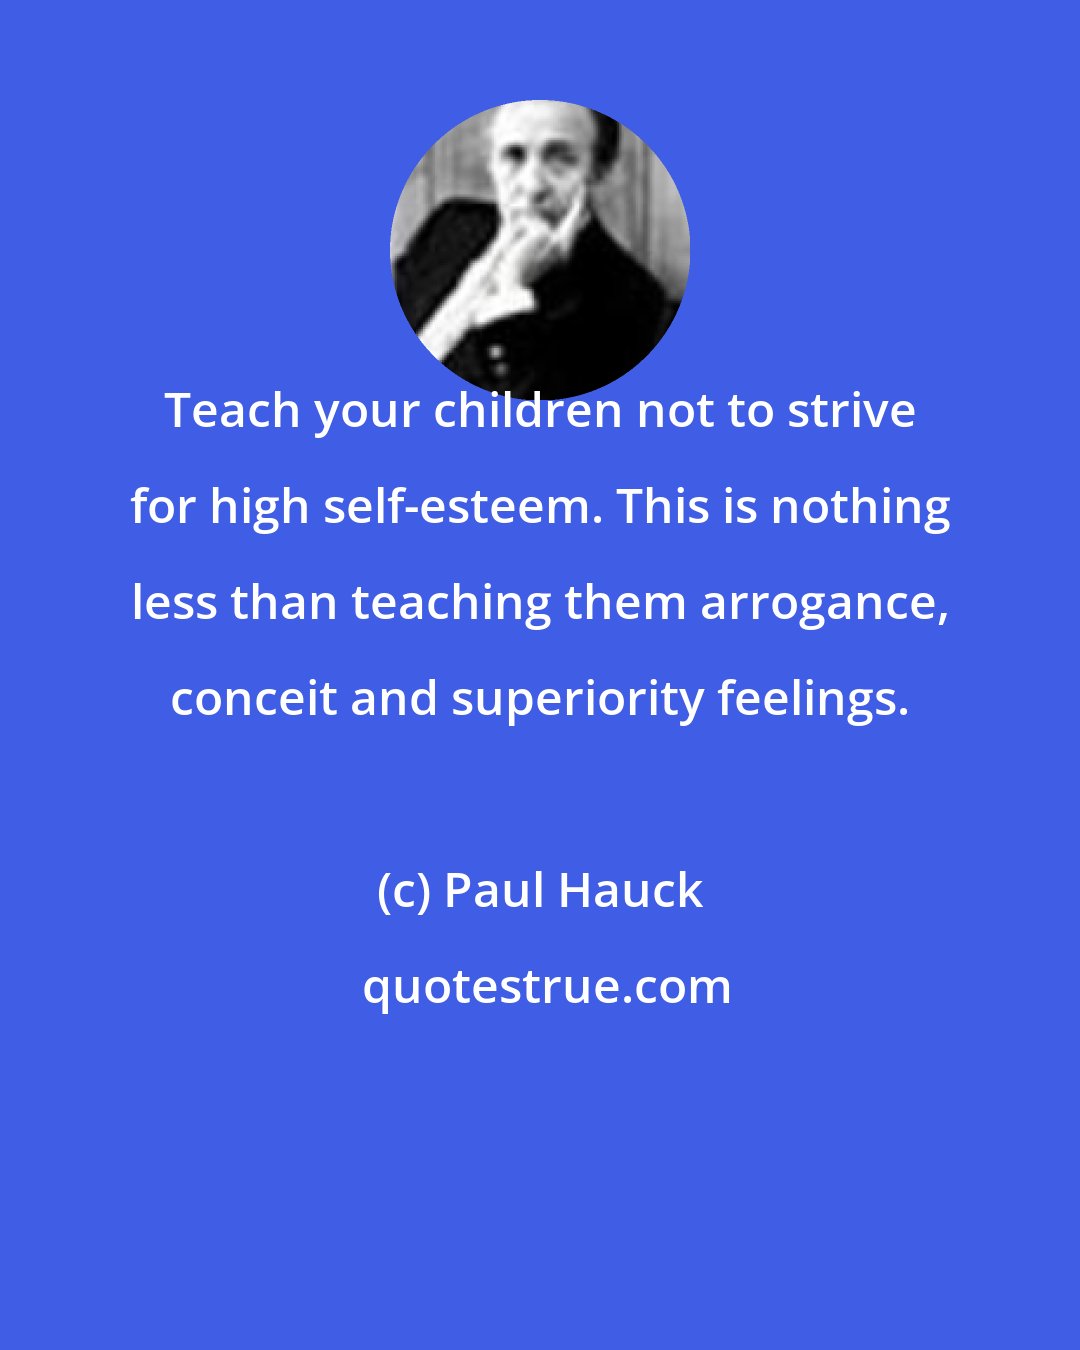 Paul Hauck: Teach your children not to strive for high self-esteem. This is nothing less than teaching them arrogance, conceit and superiority feelings.